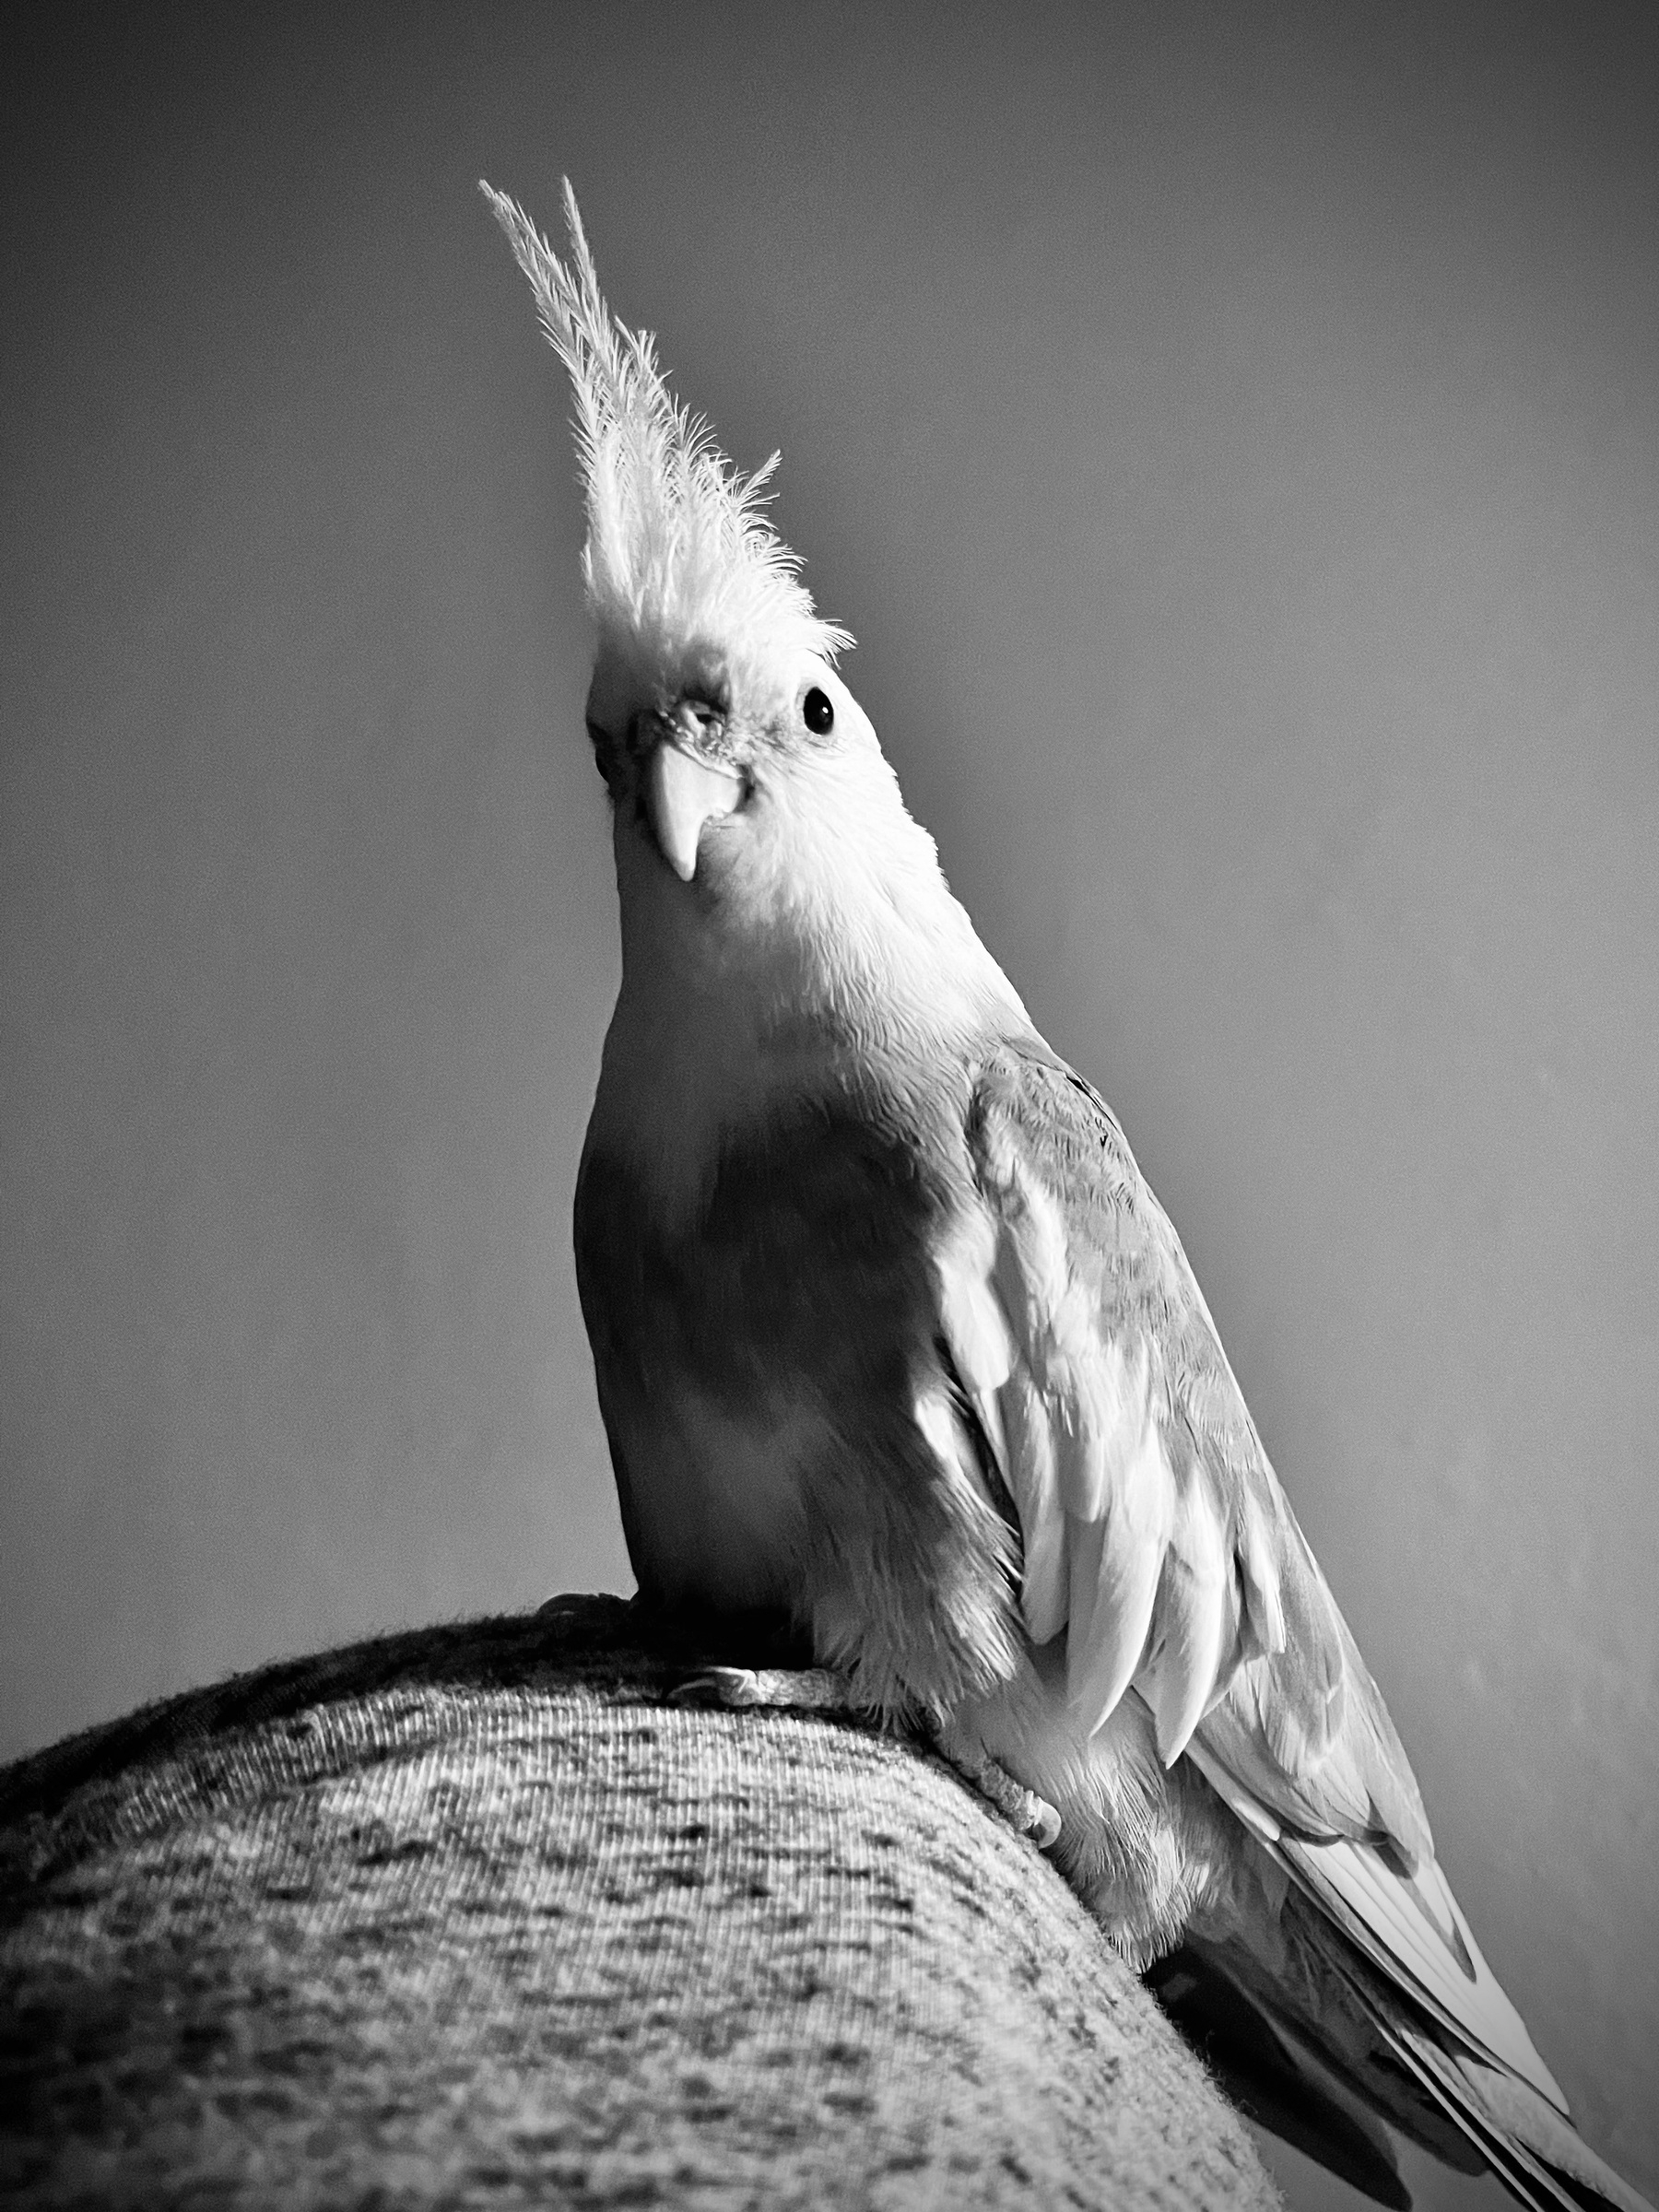 A black-and-white image of a cockatiel on a human knee